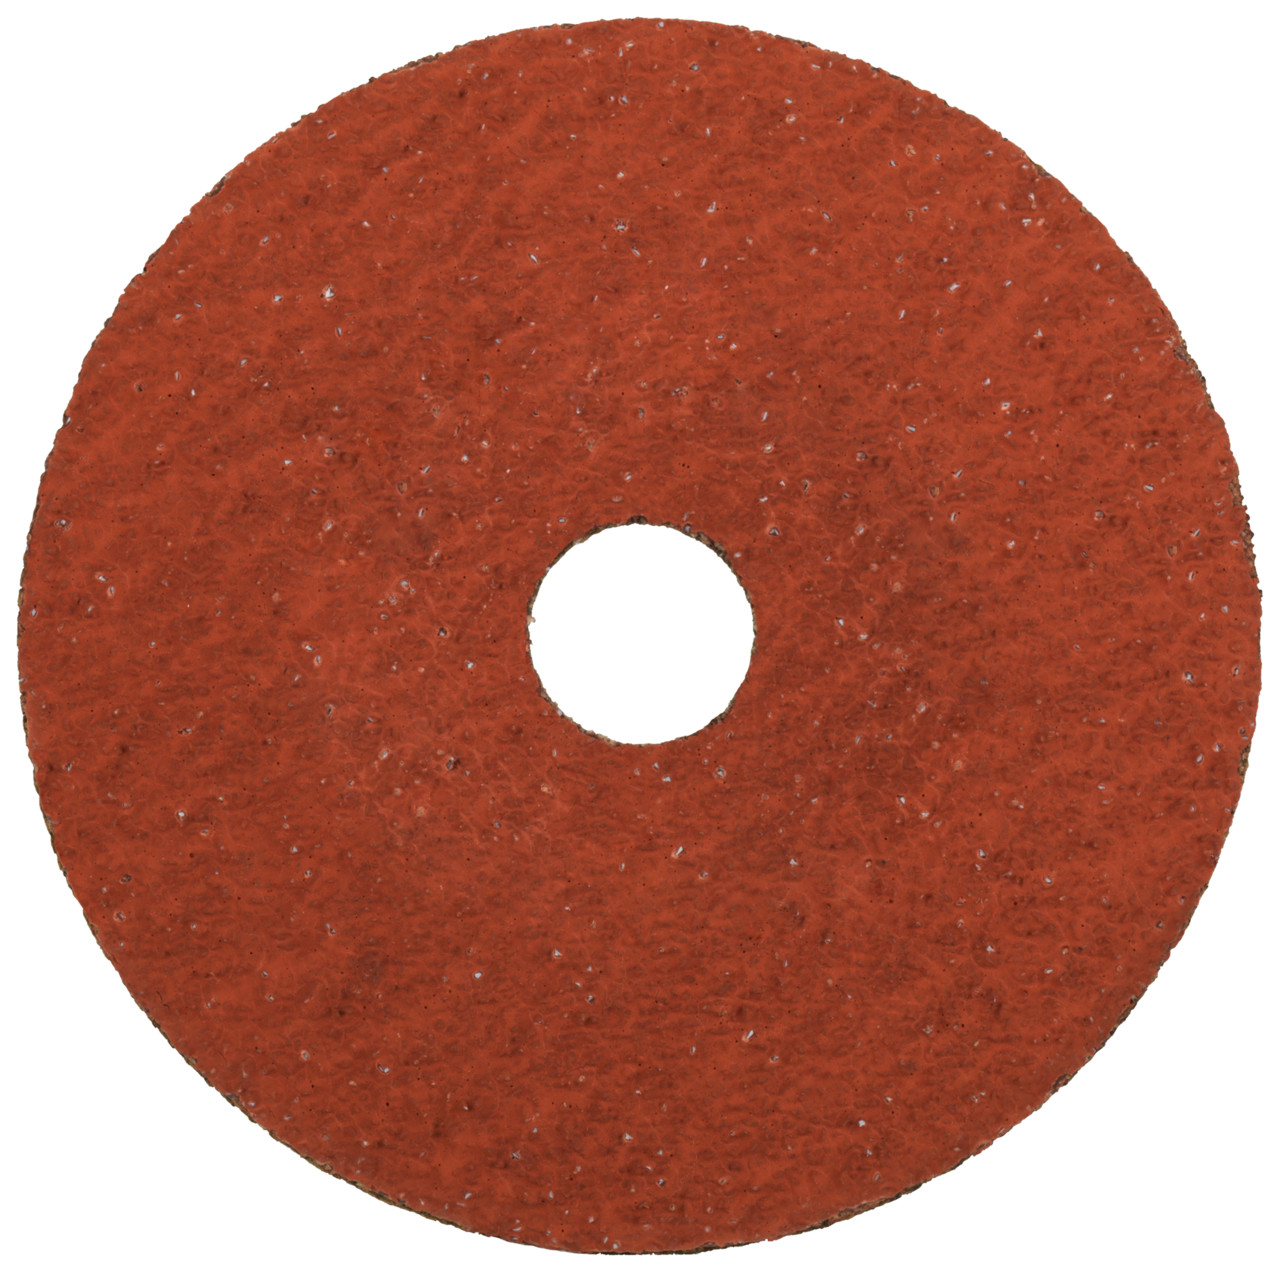 Tyrolit CA-PA93 N NATURAL FIBRE DISC DxH 115x22 For steel and stainless steel, P36, form: DISC, Art. 712259